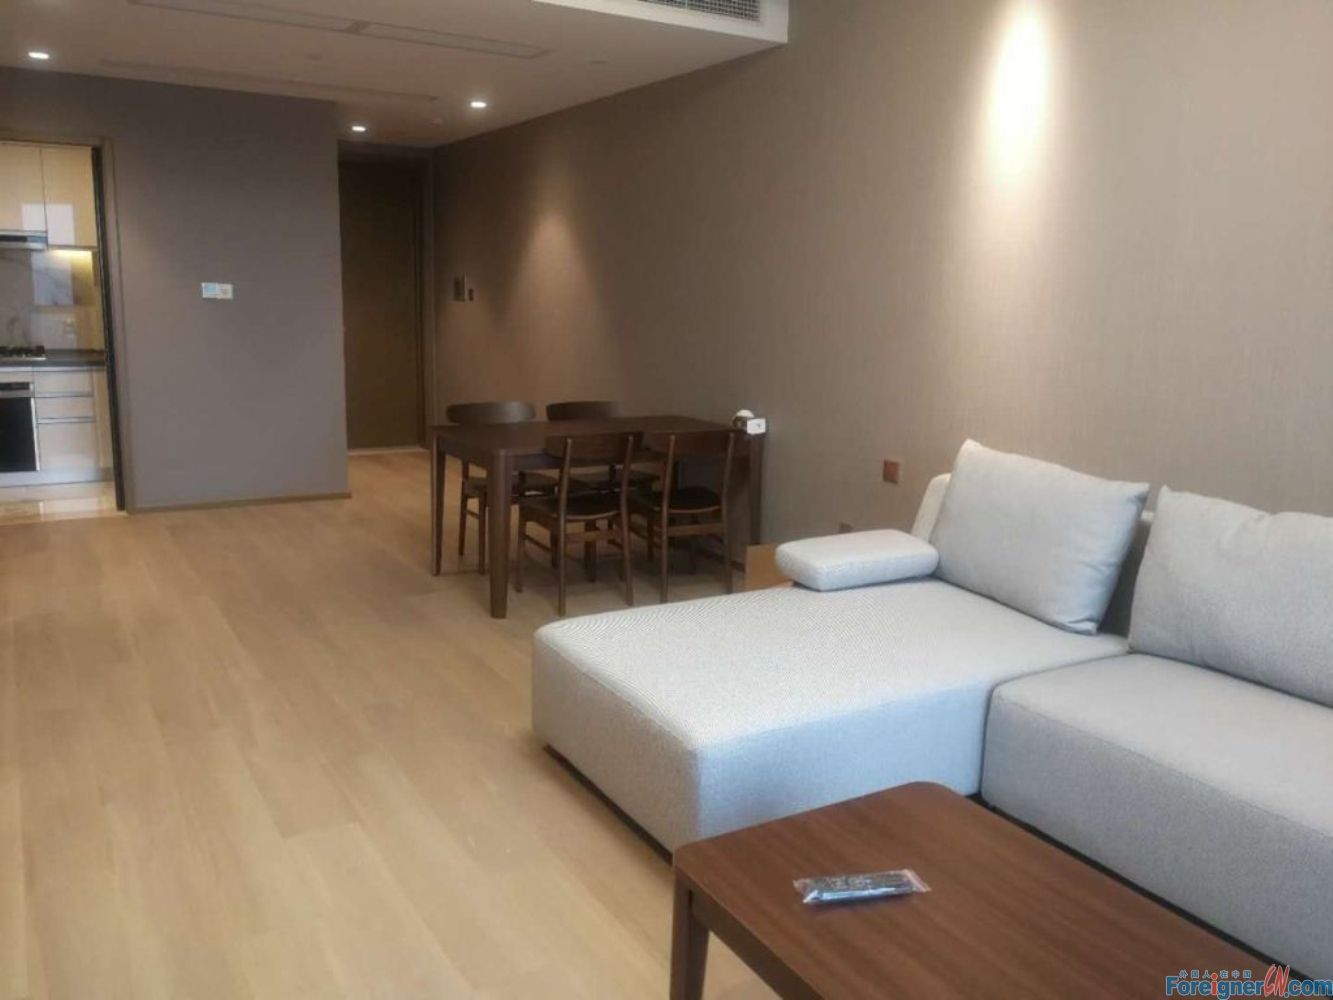 Wow !!! graet apartment rent in Suzhou/1bedrooms and 1 bathroom/Jinji Lake view/nice kitchen/great and cozy rooms/clean restroom